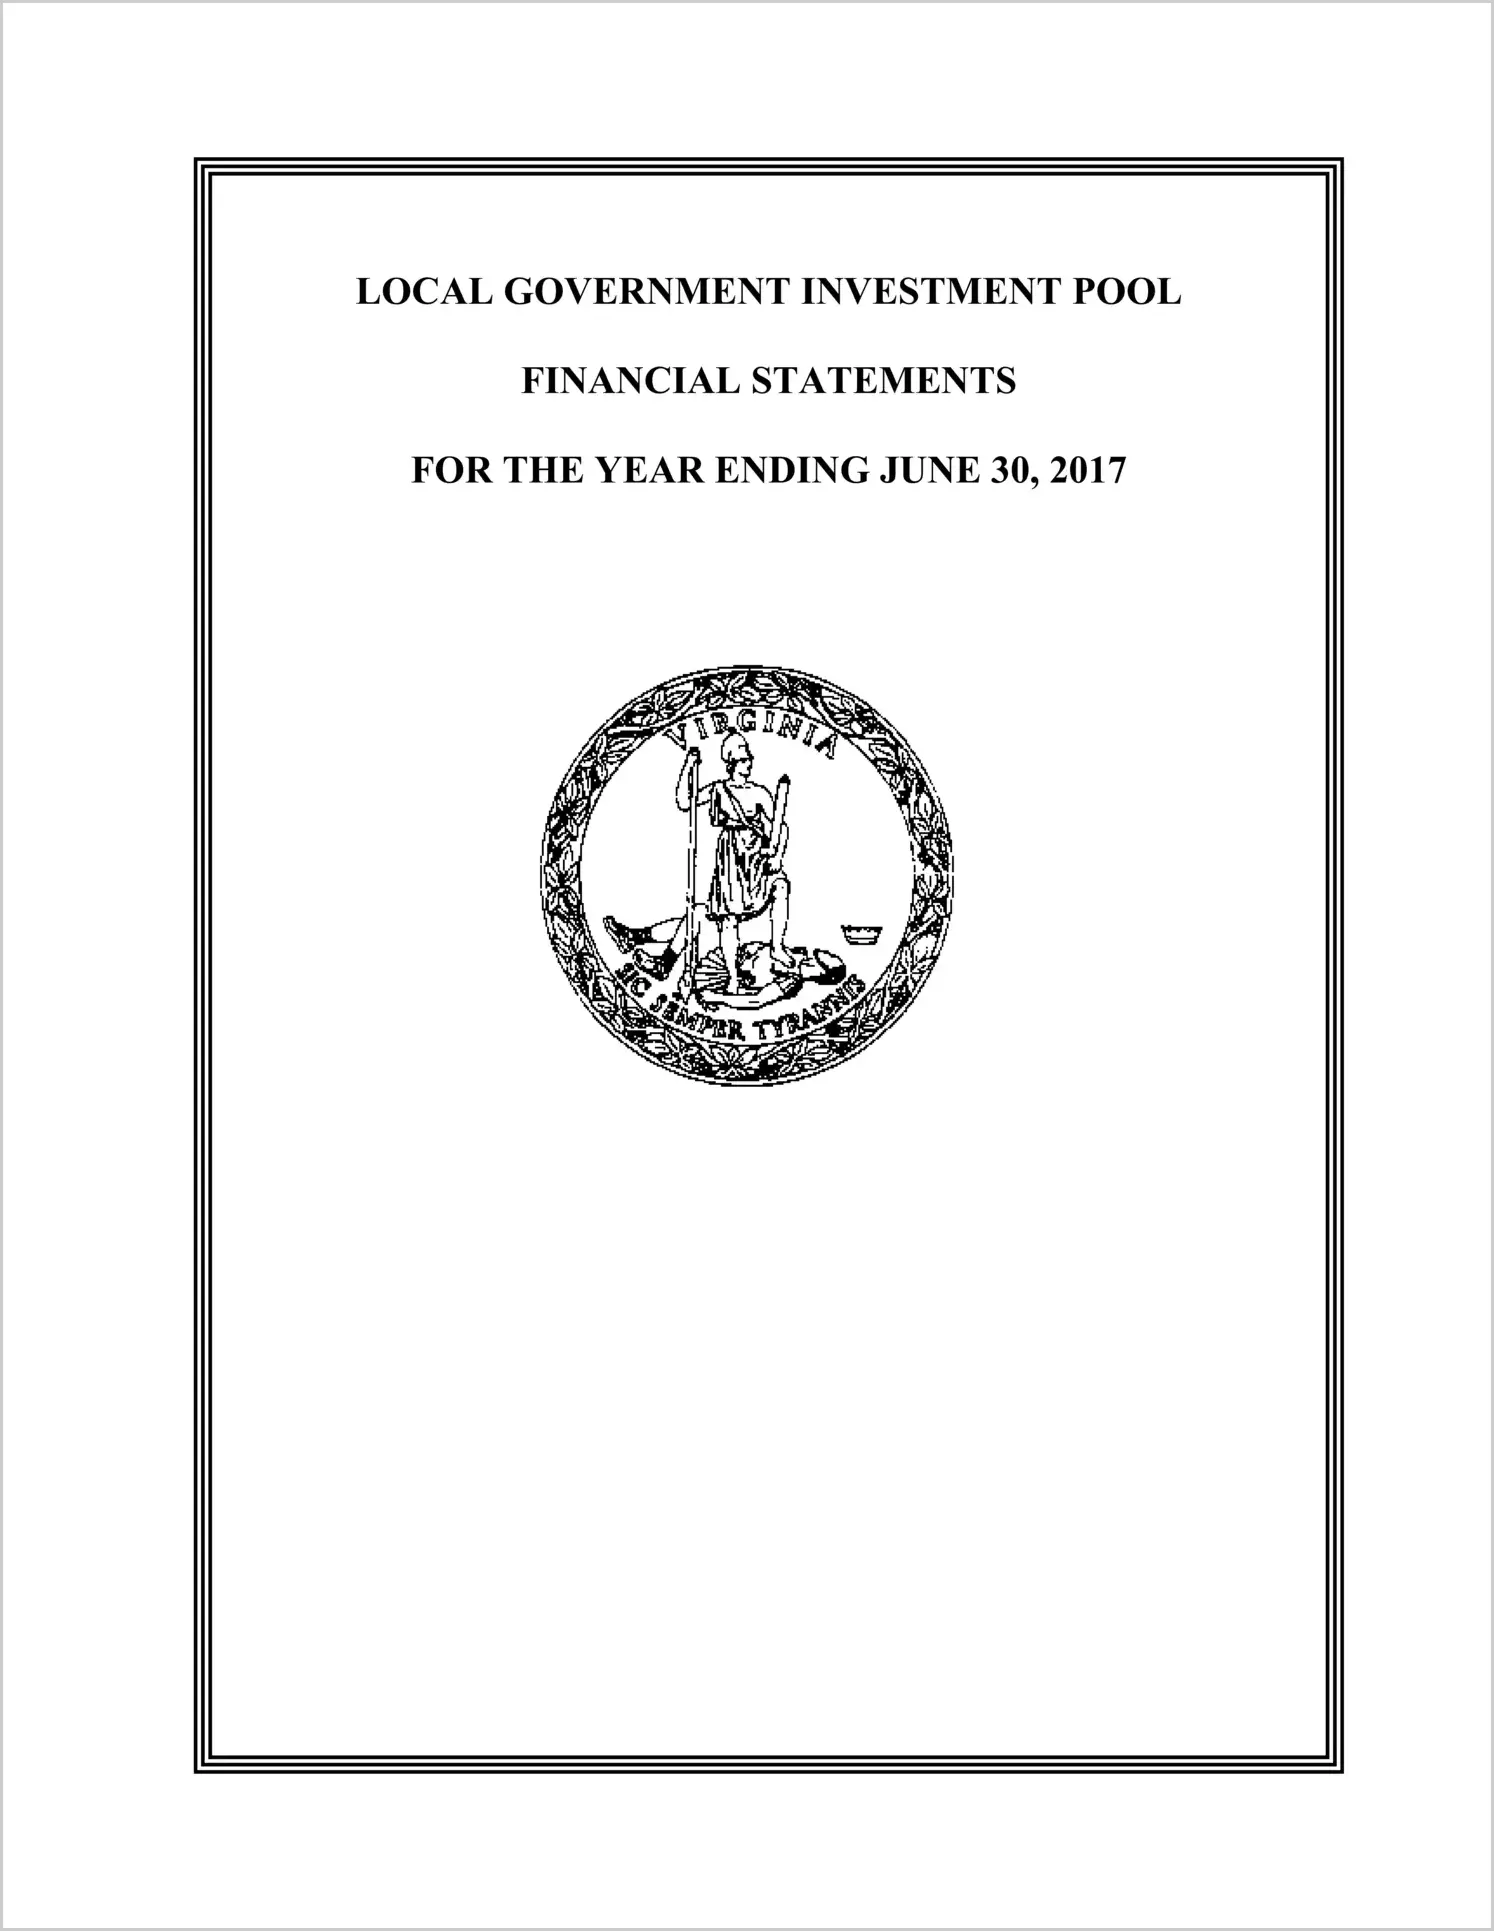 Local Government Investment Pool Financial Statements for the year ended June 30, 2017